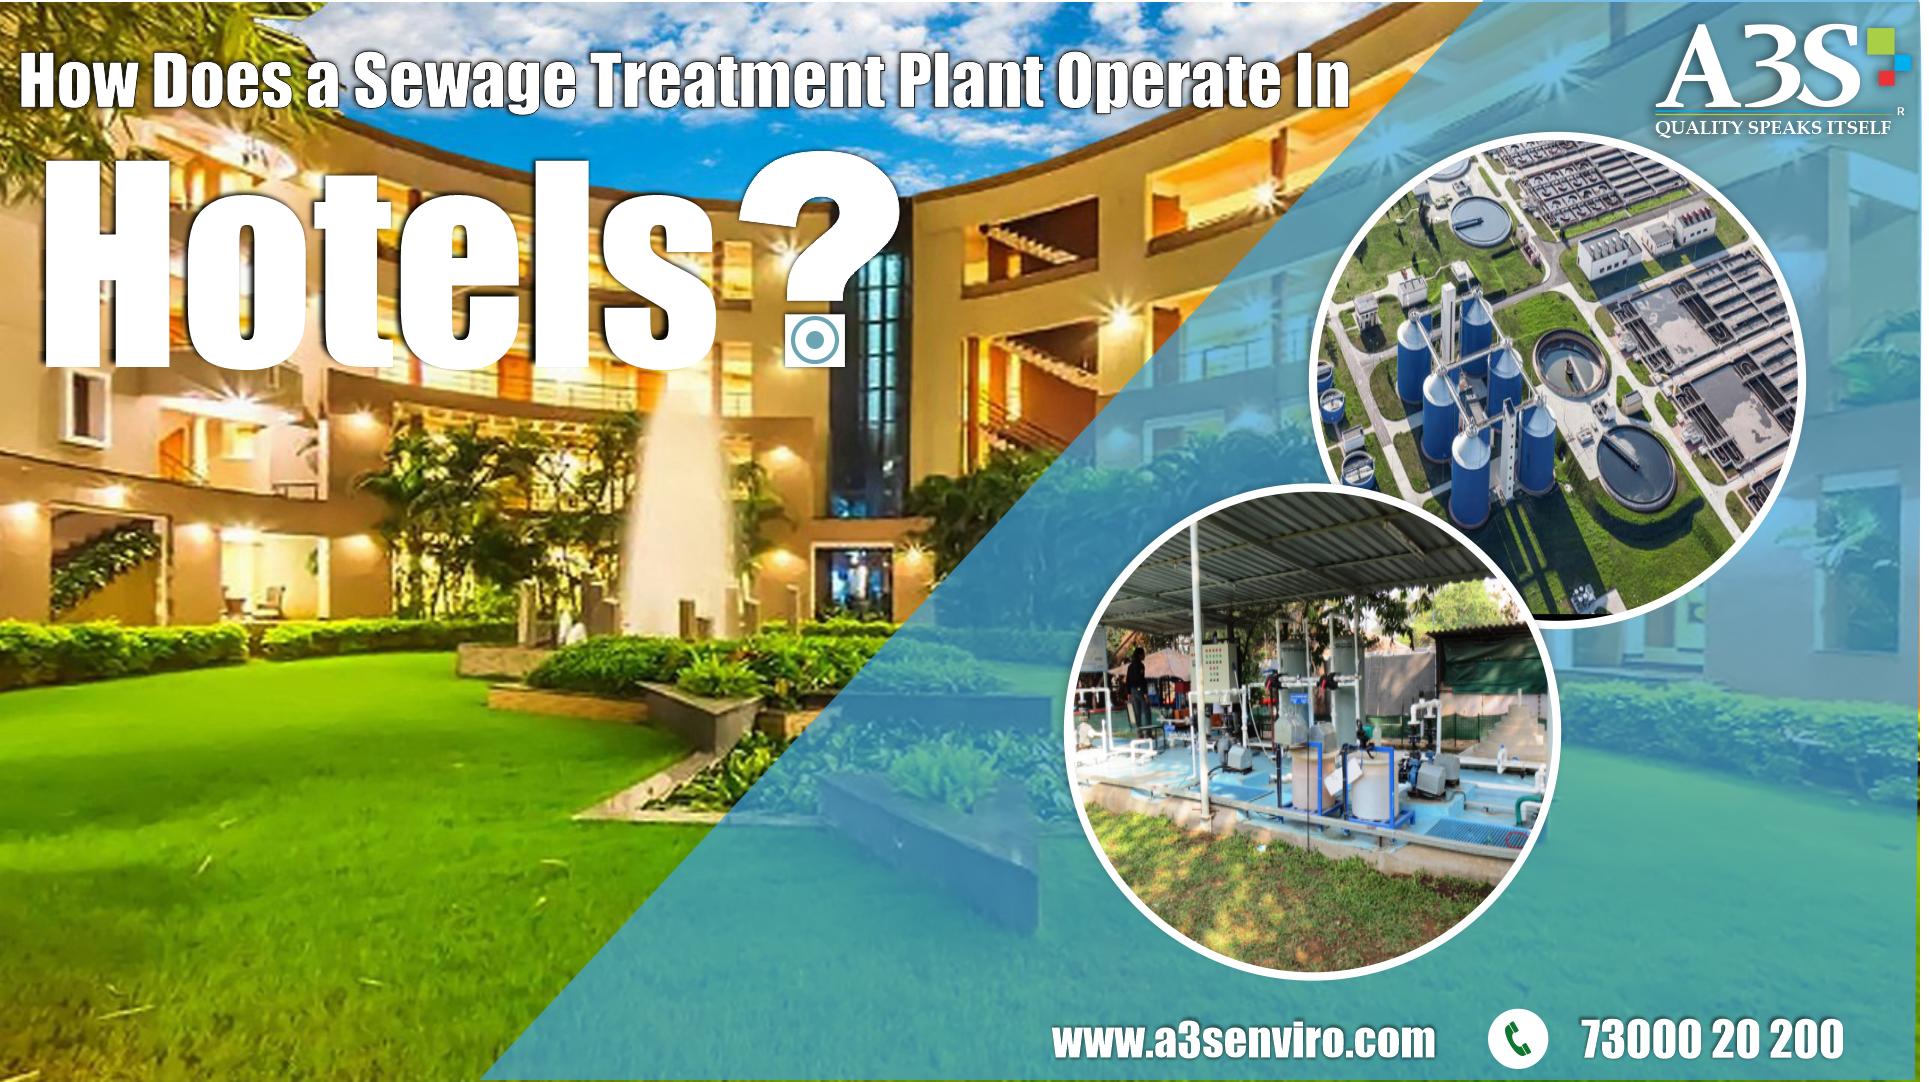 How Does a Sewage Treatment Plant Operate In Hotels